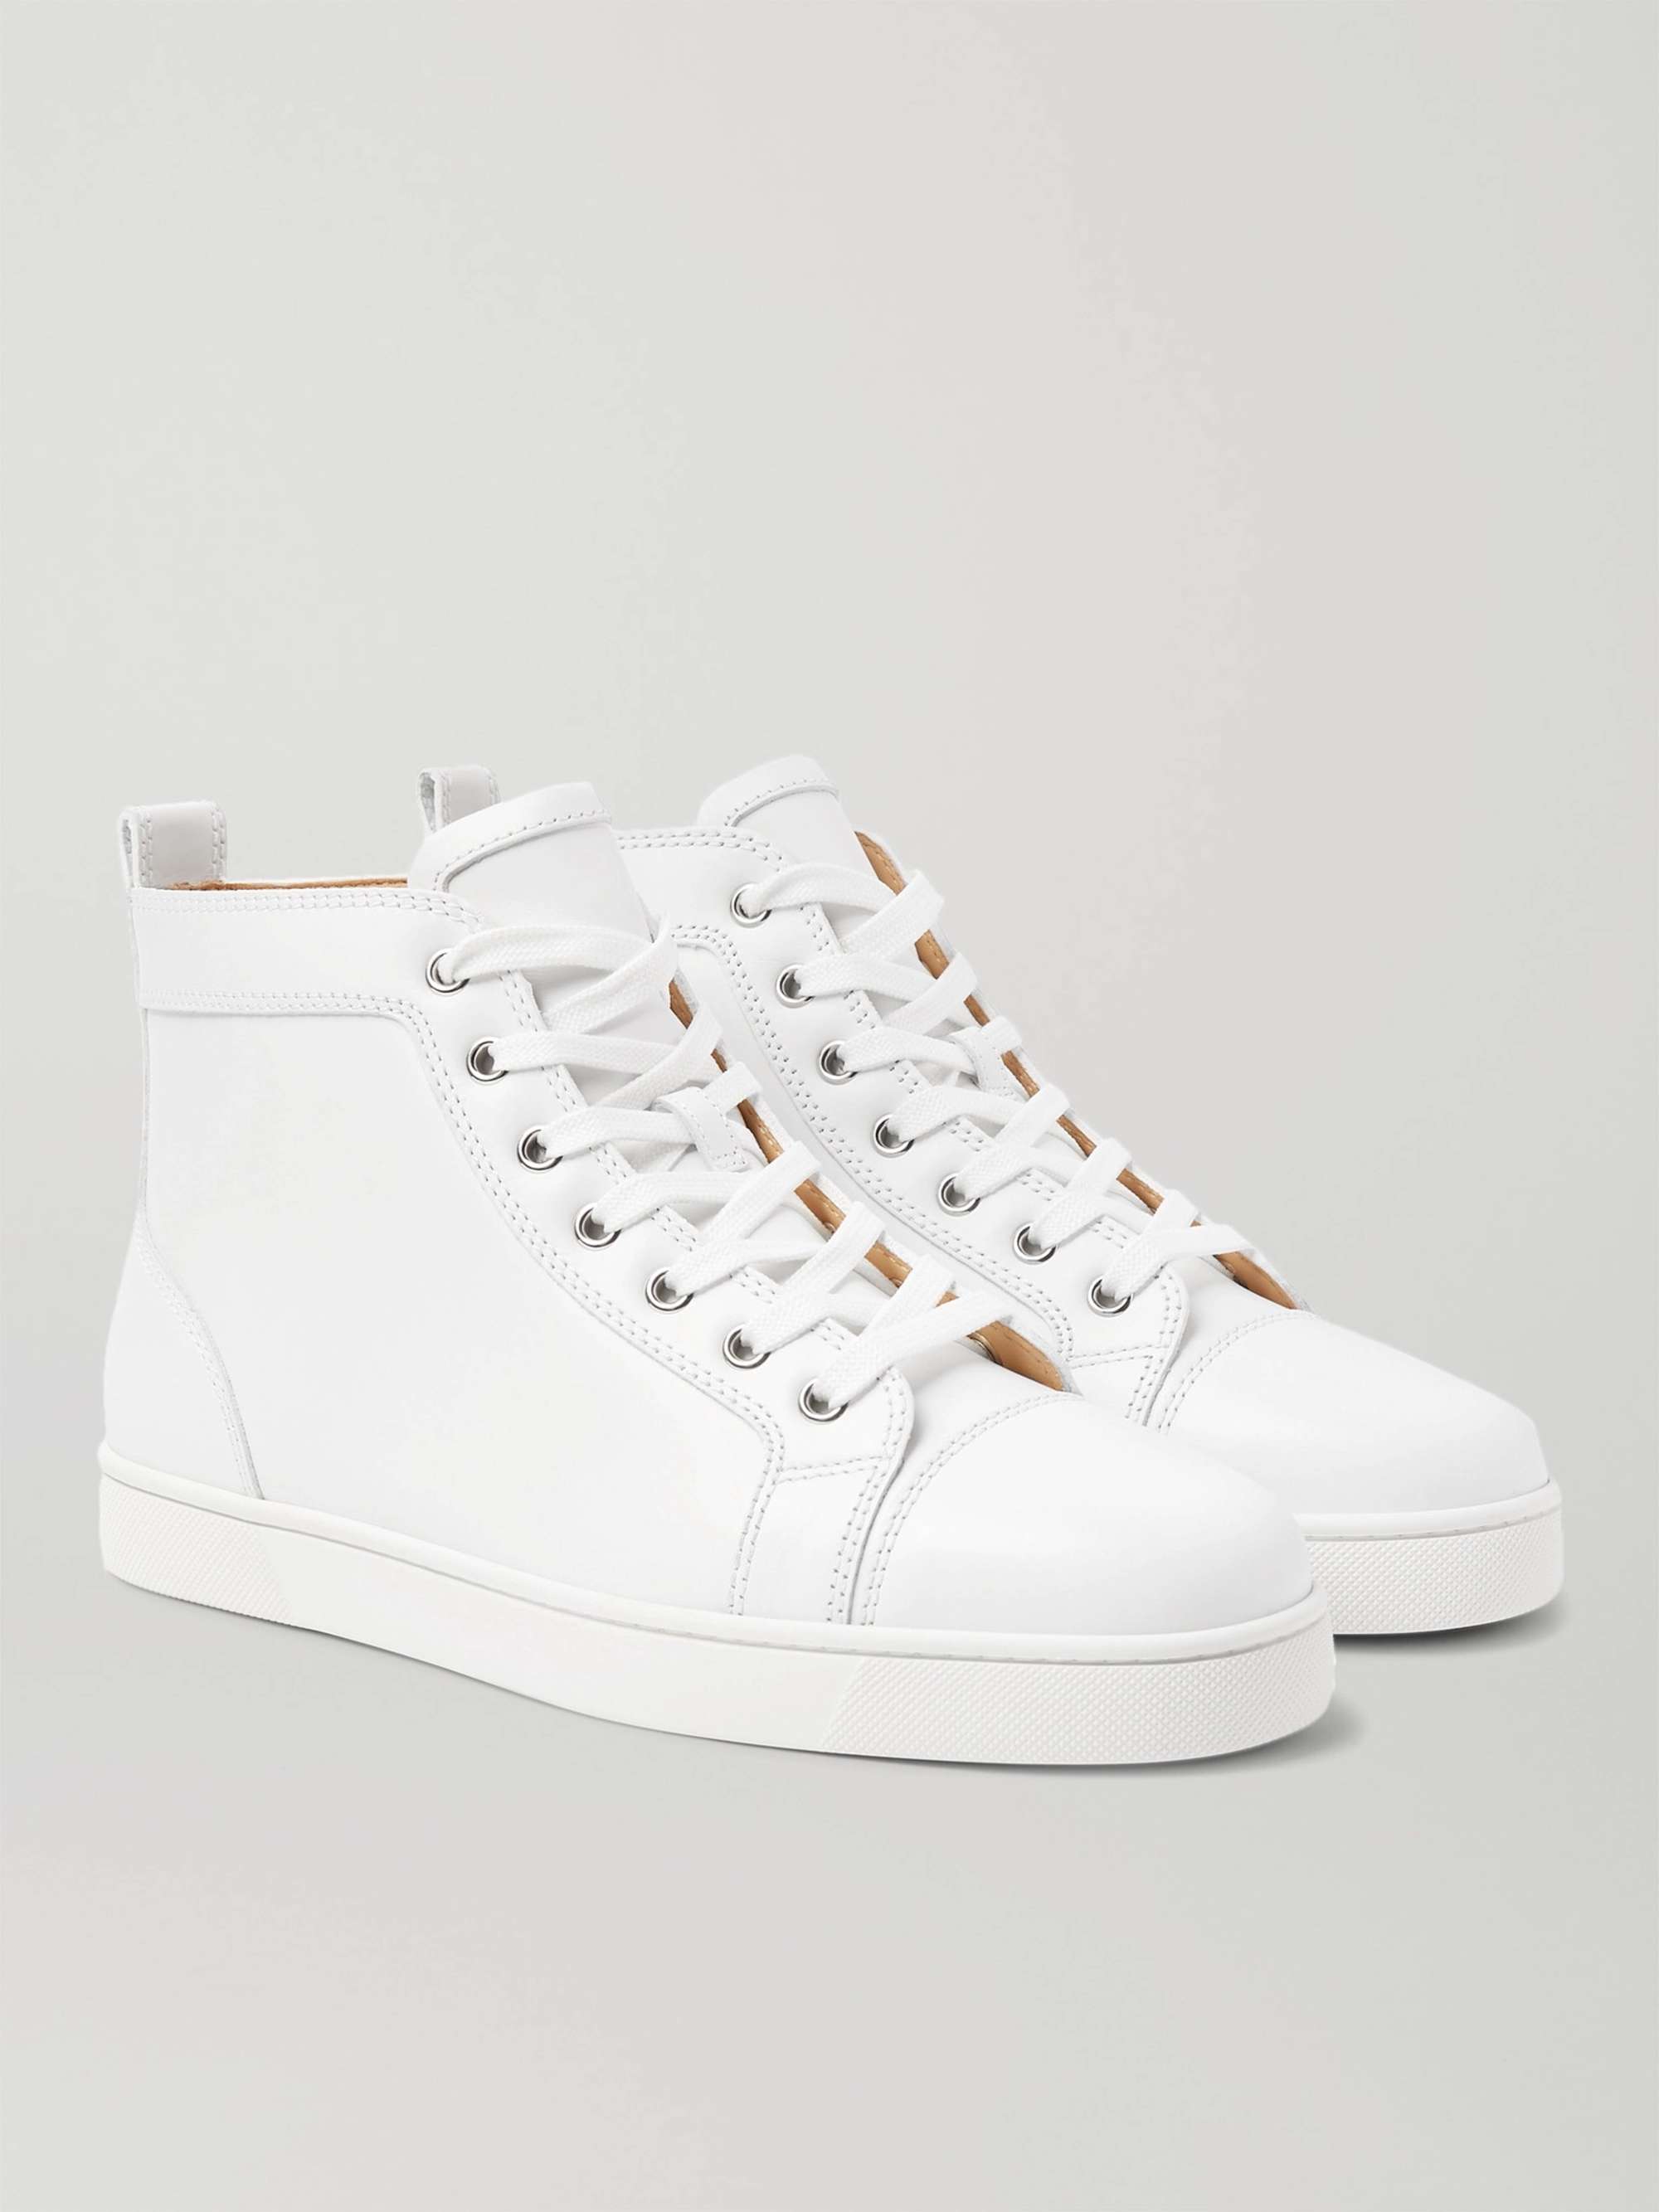 CHRISTIAN LOUBOUTIN Louis Leather High-Top Sneakers